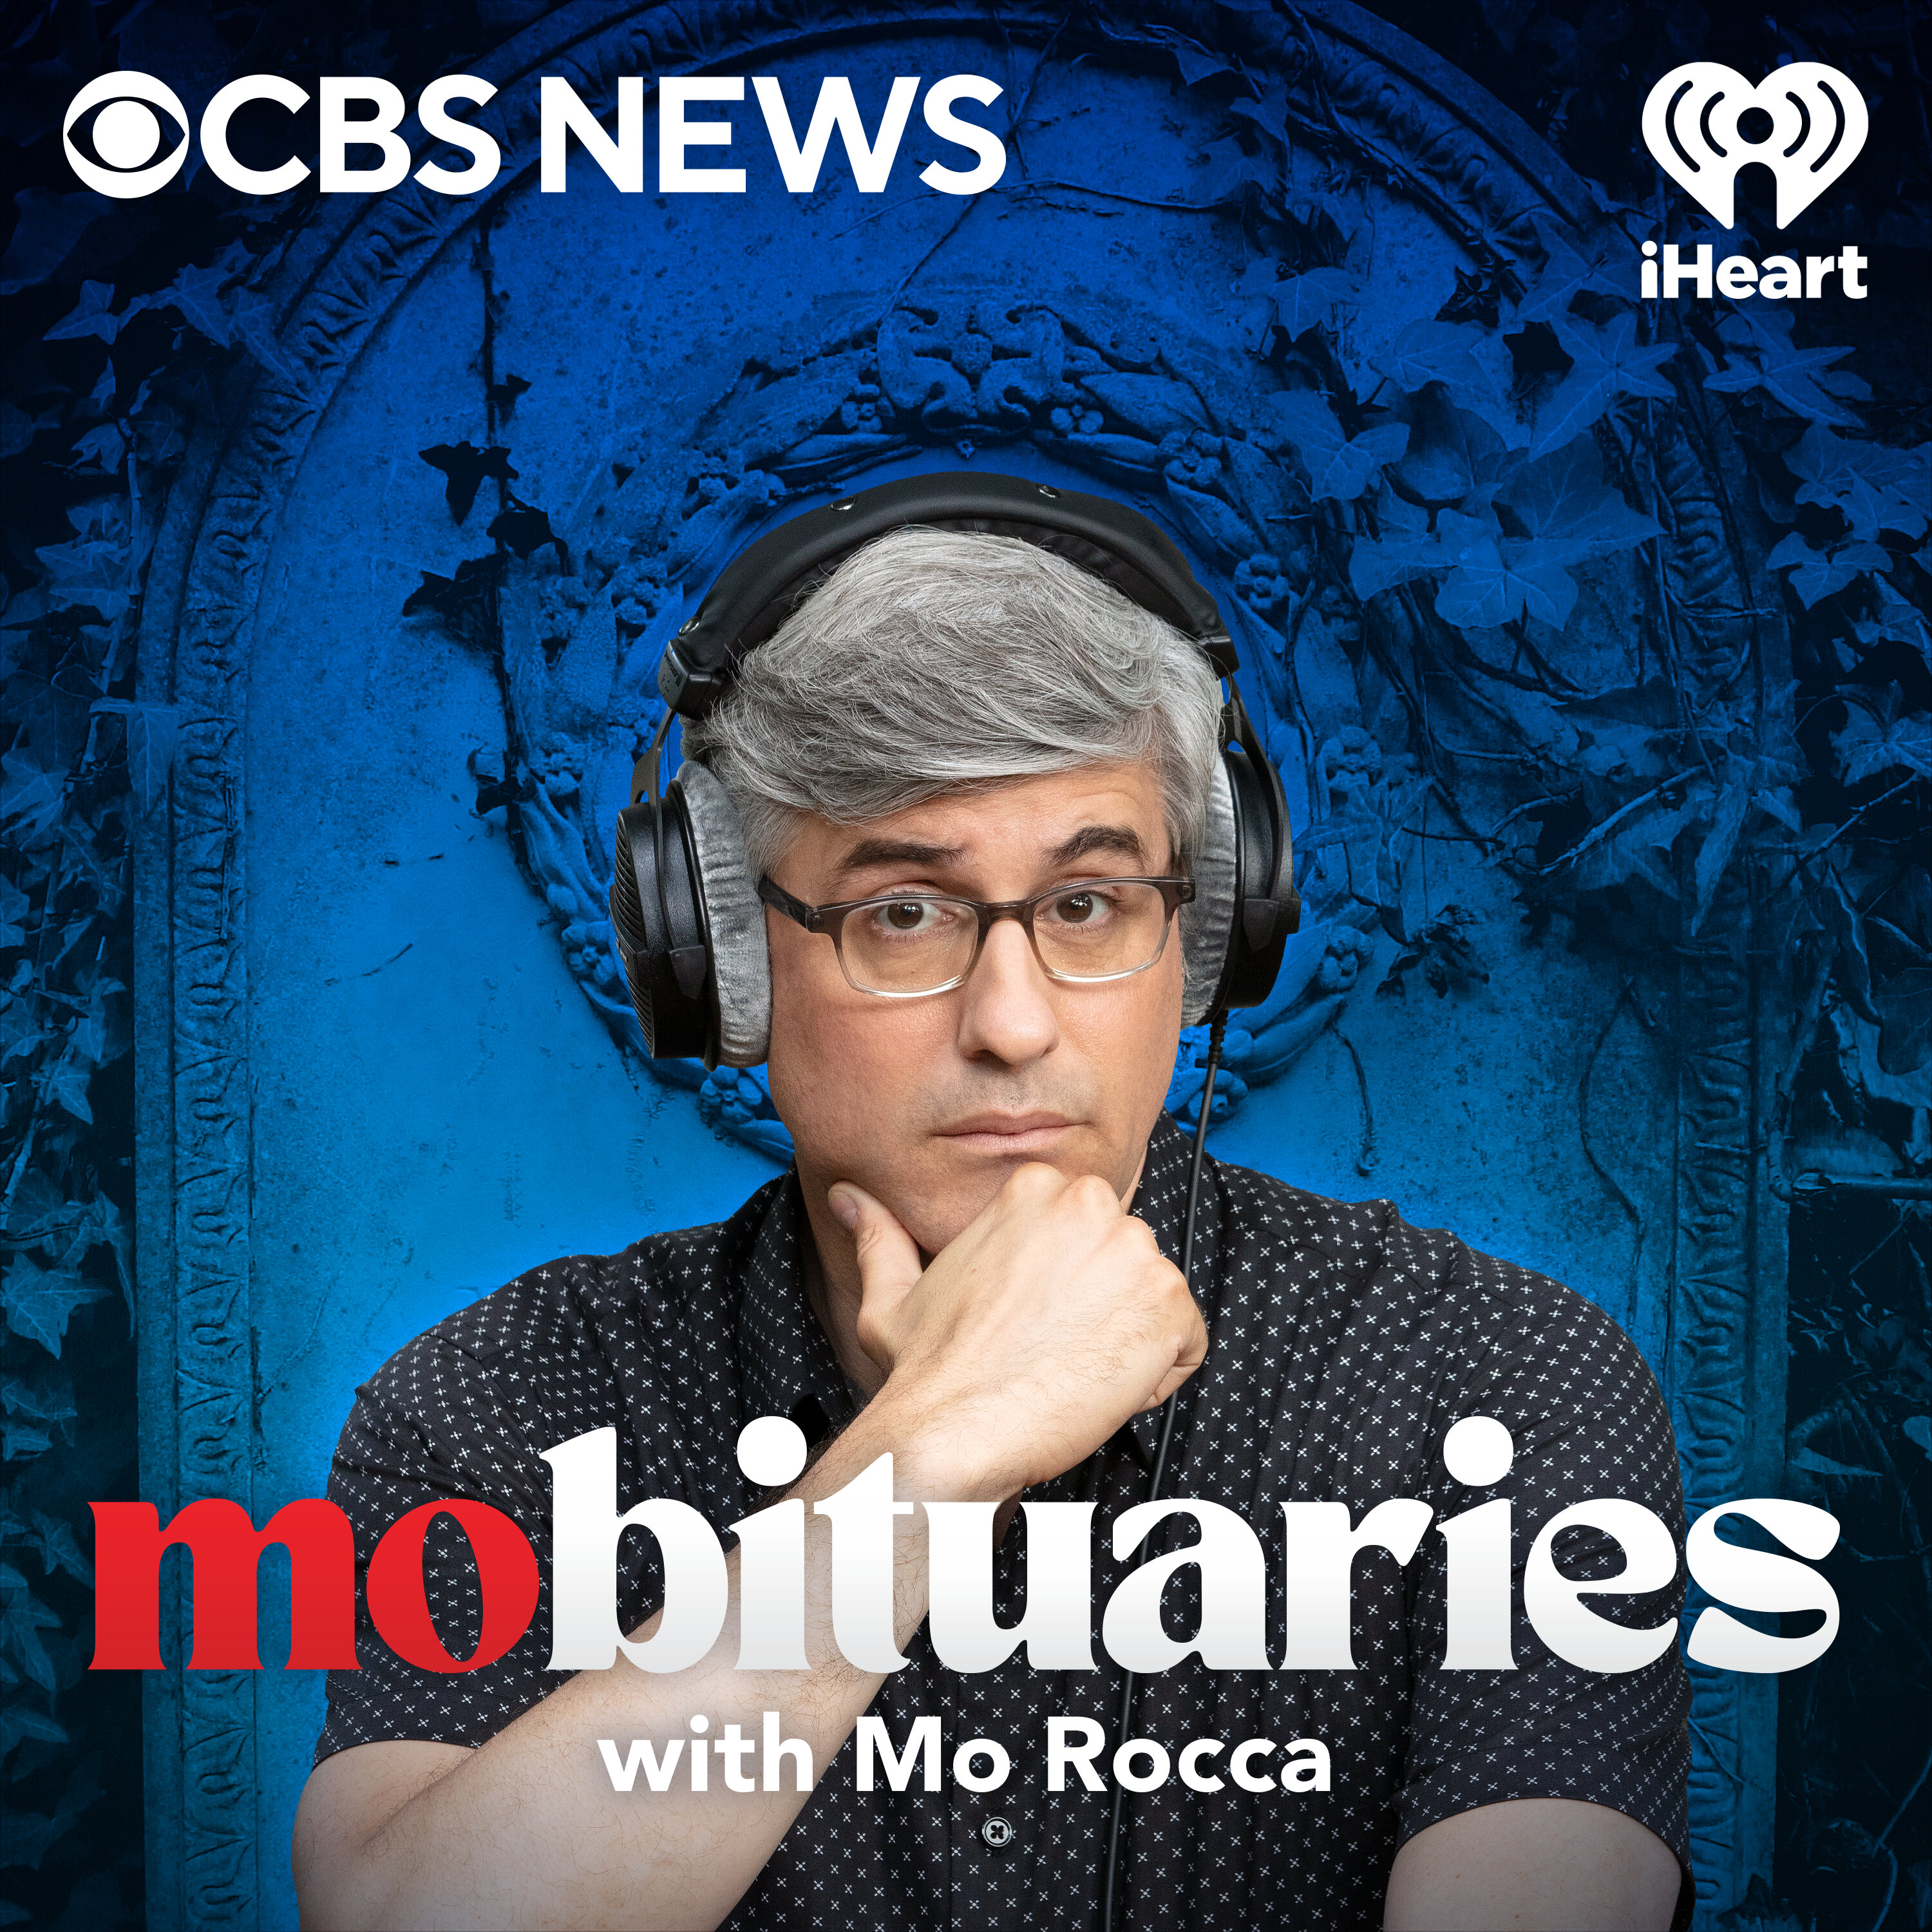 Mobits Extra: Mo’s Mystery Bust by CBS News & iHeartPodcasts